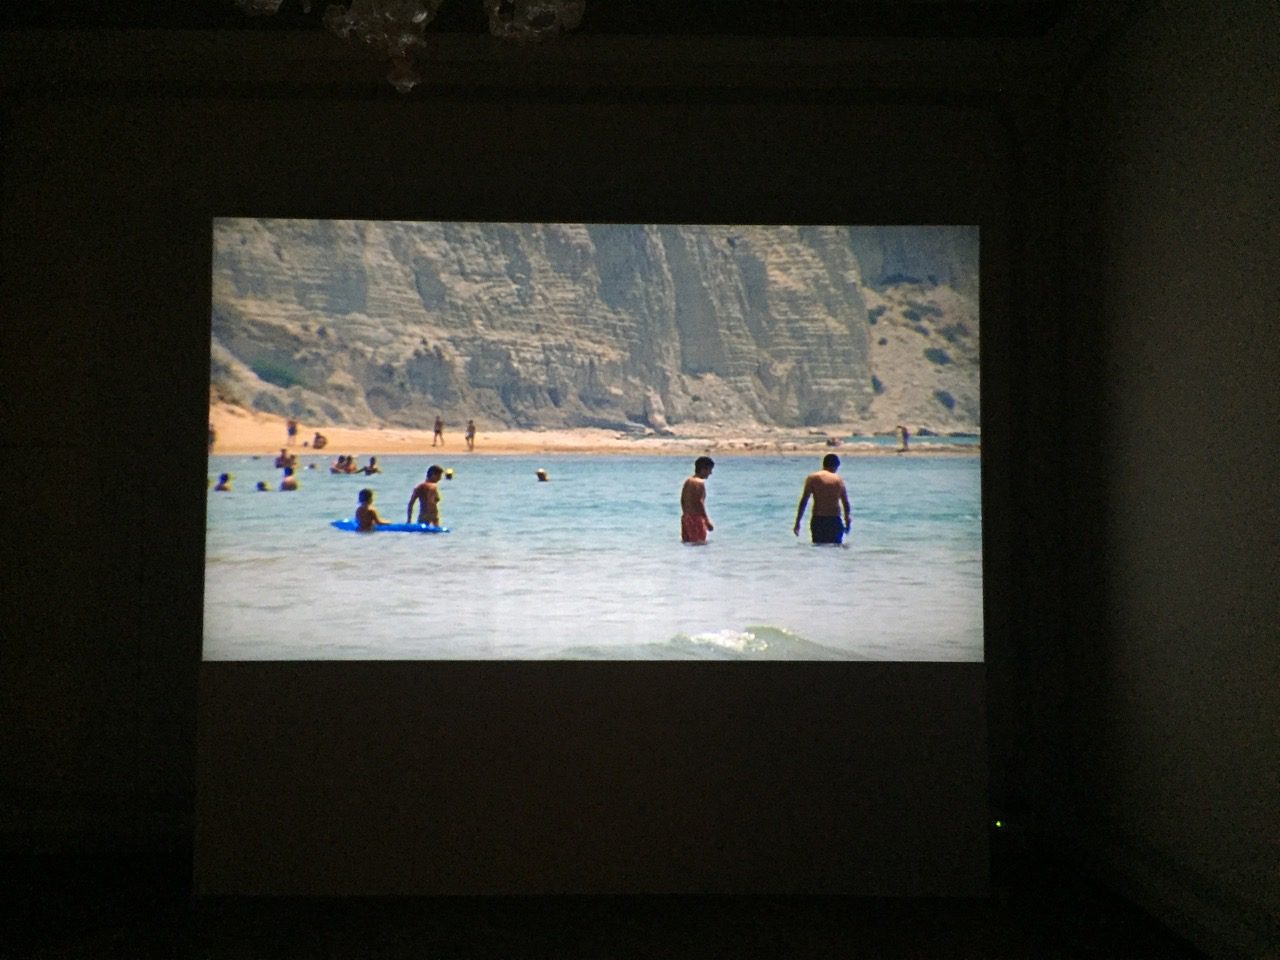 Isaac Julien - The Leopard (Western Union: small boats (2007) 
Single screen projection, Super 16mm colour lm transferred to high de nition, 5.1 surround sound (19 min 51 sec)